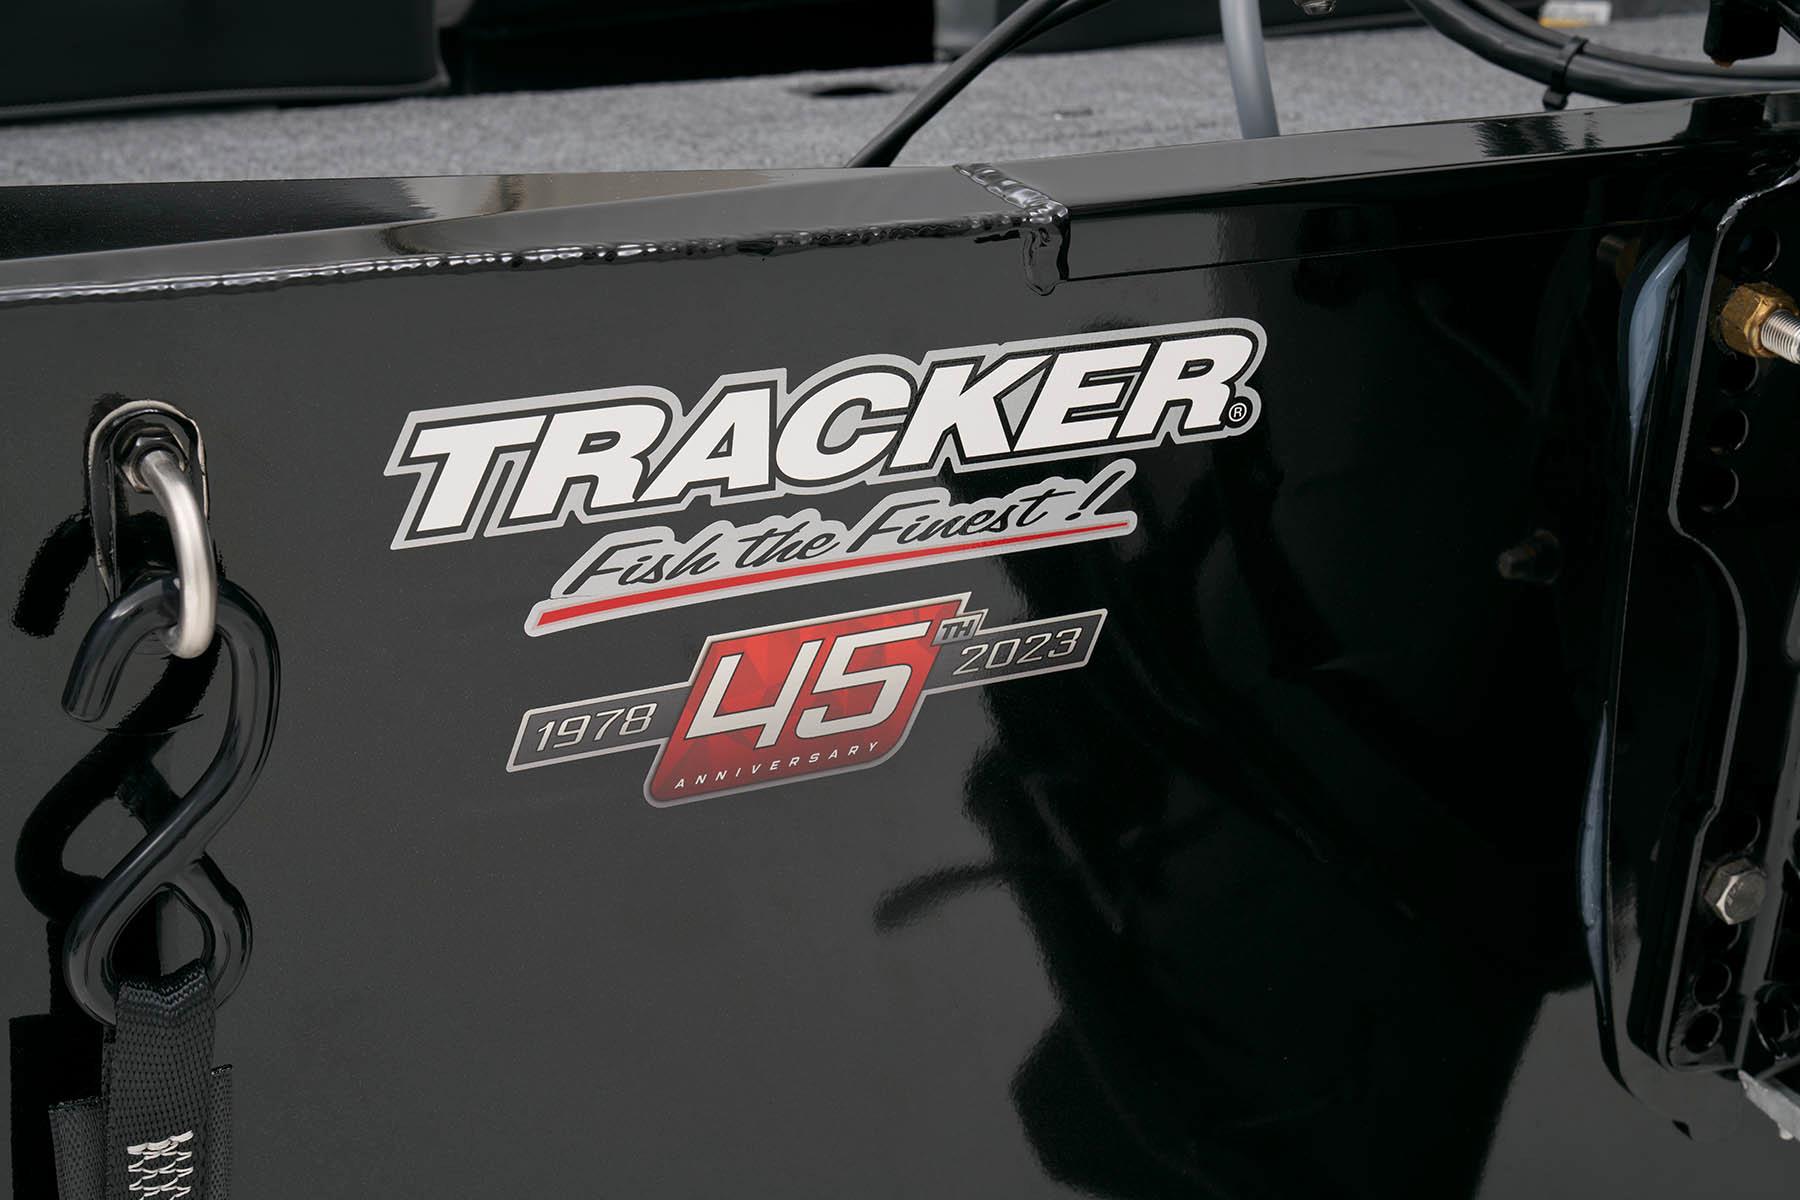 Bass Tracker Boats Fish the Finest Boat Hull Decal - Single